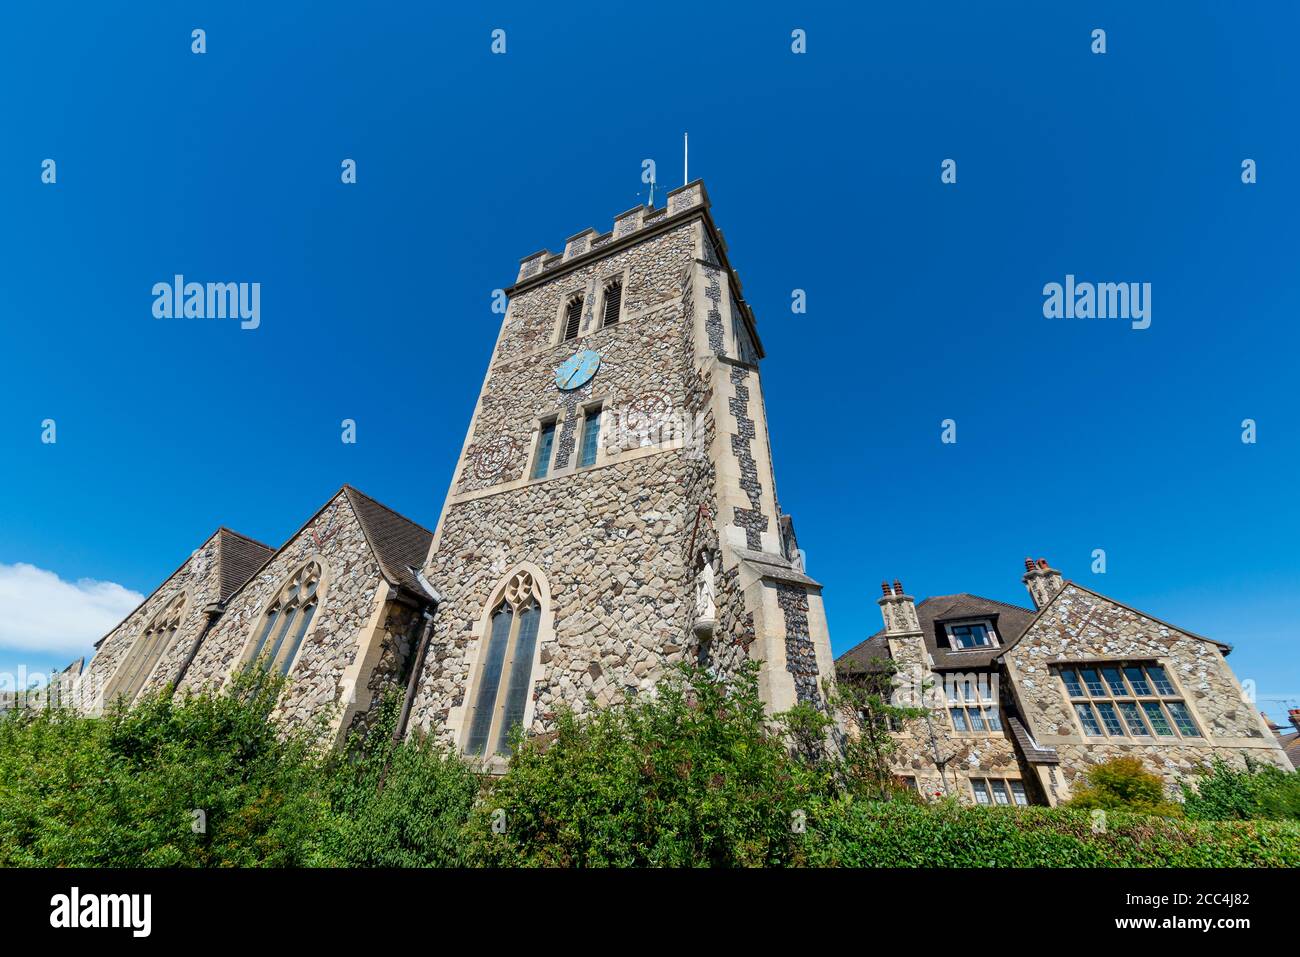 Catholic Church of Our Lady of Lourdes & St Joseph church, on corner of Leigh Road and Cliffsea Grove. Parish church. Community location in town Stock Photo